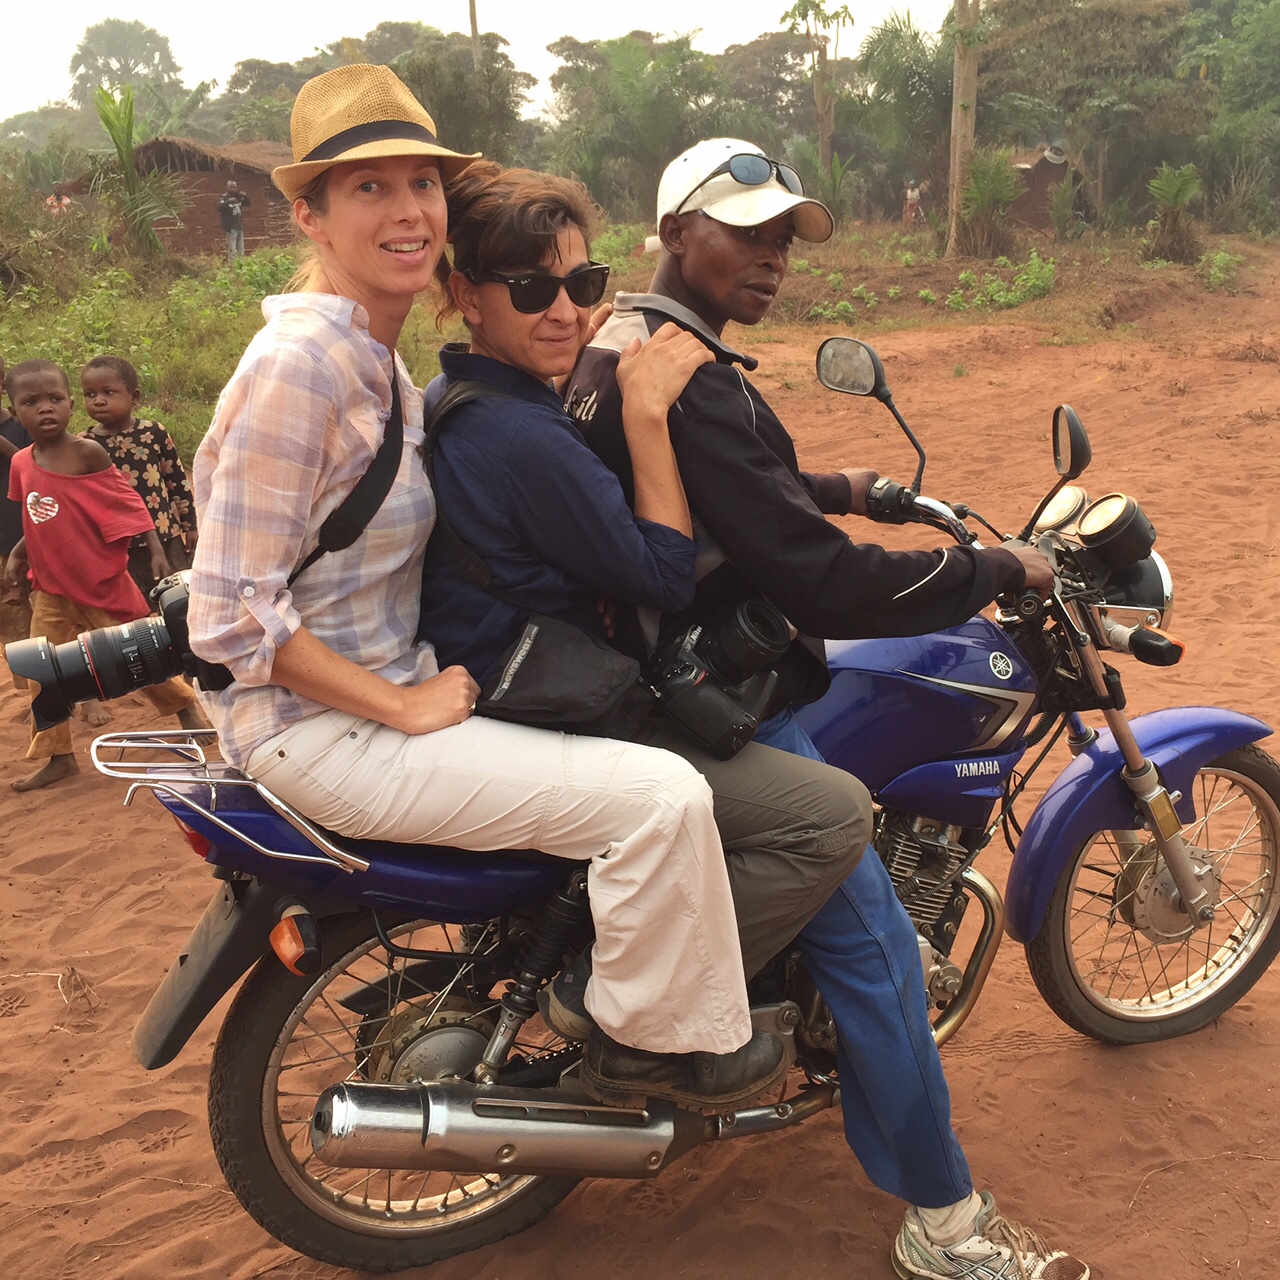 TIME’s Africa Bureau Chief Aryn Baker and photographer Lynsey Addario on assignment for TIME in the Democratic Republic of Congo. (<a href=